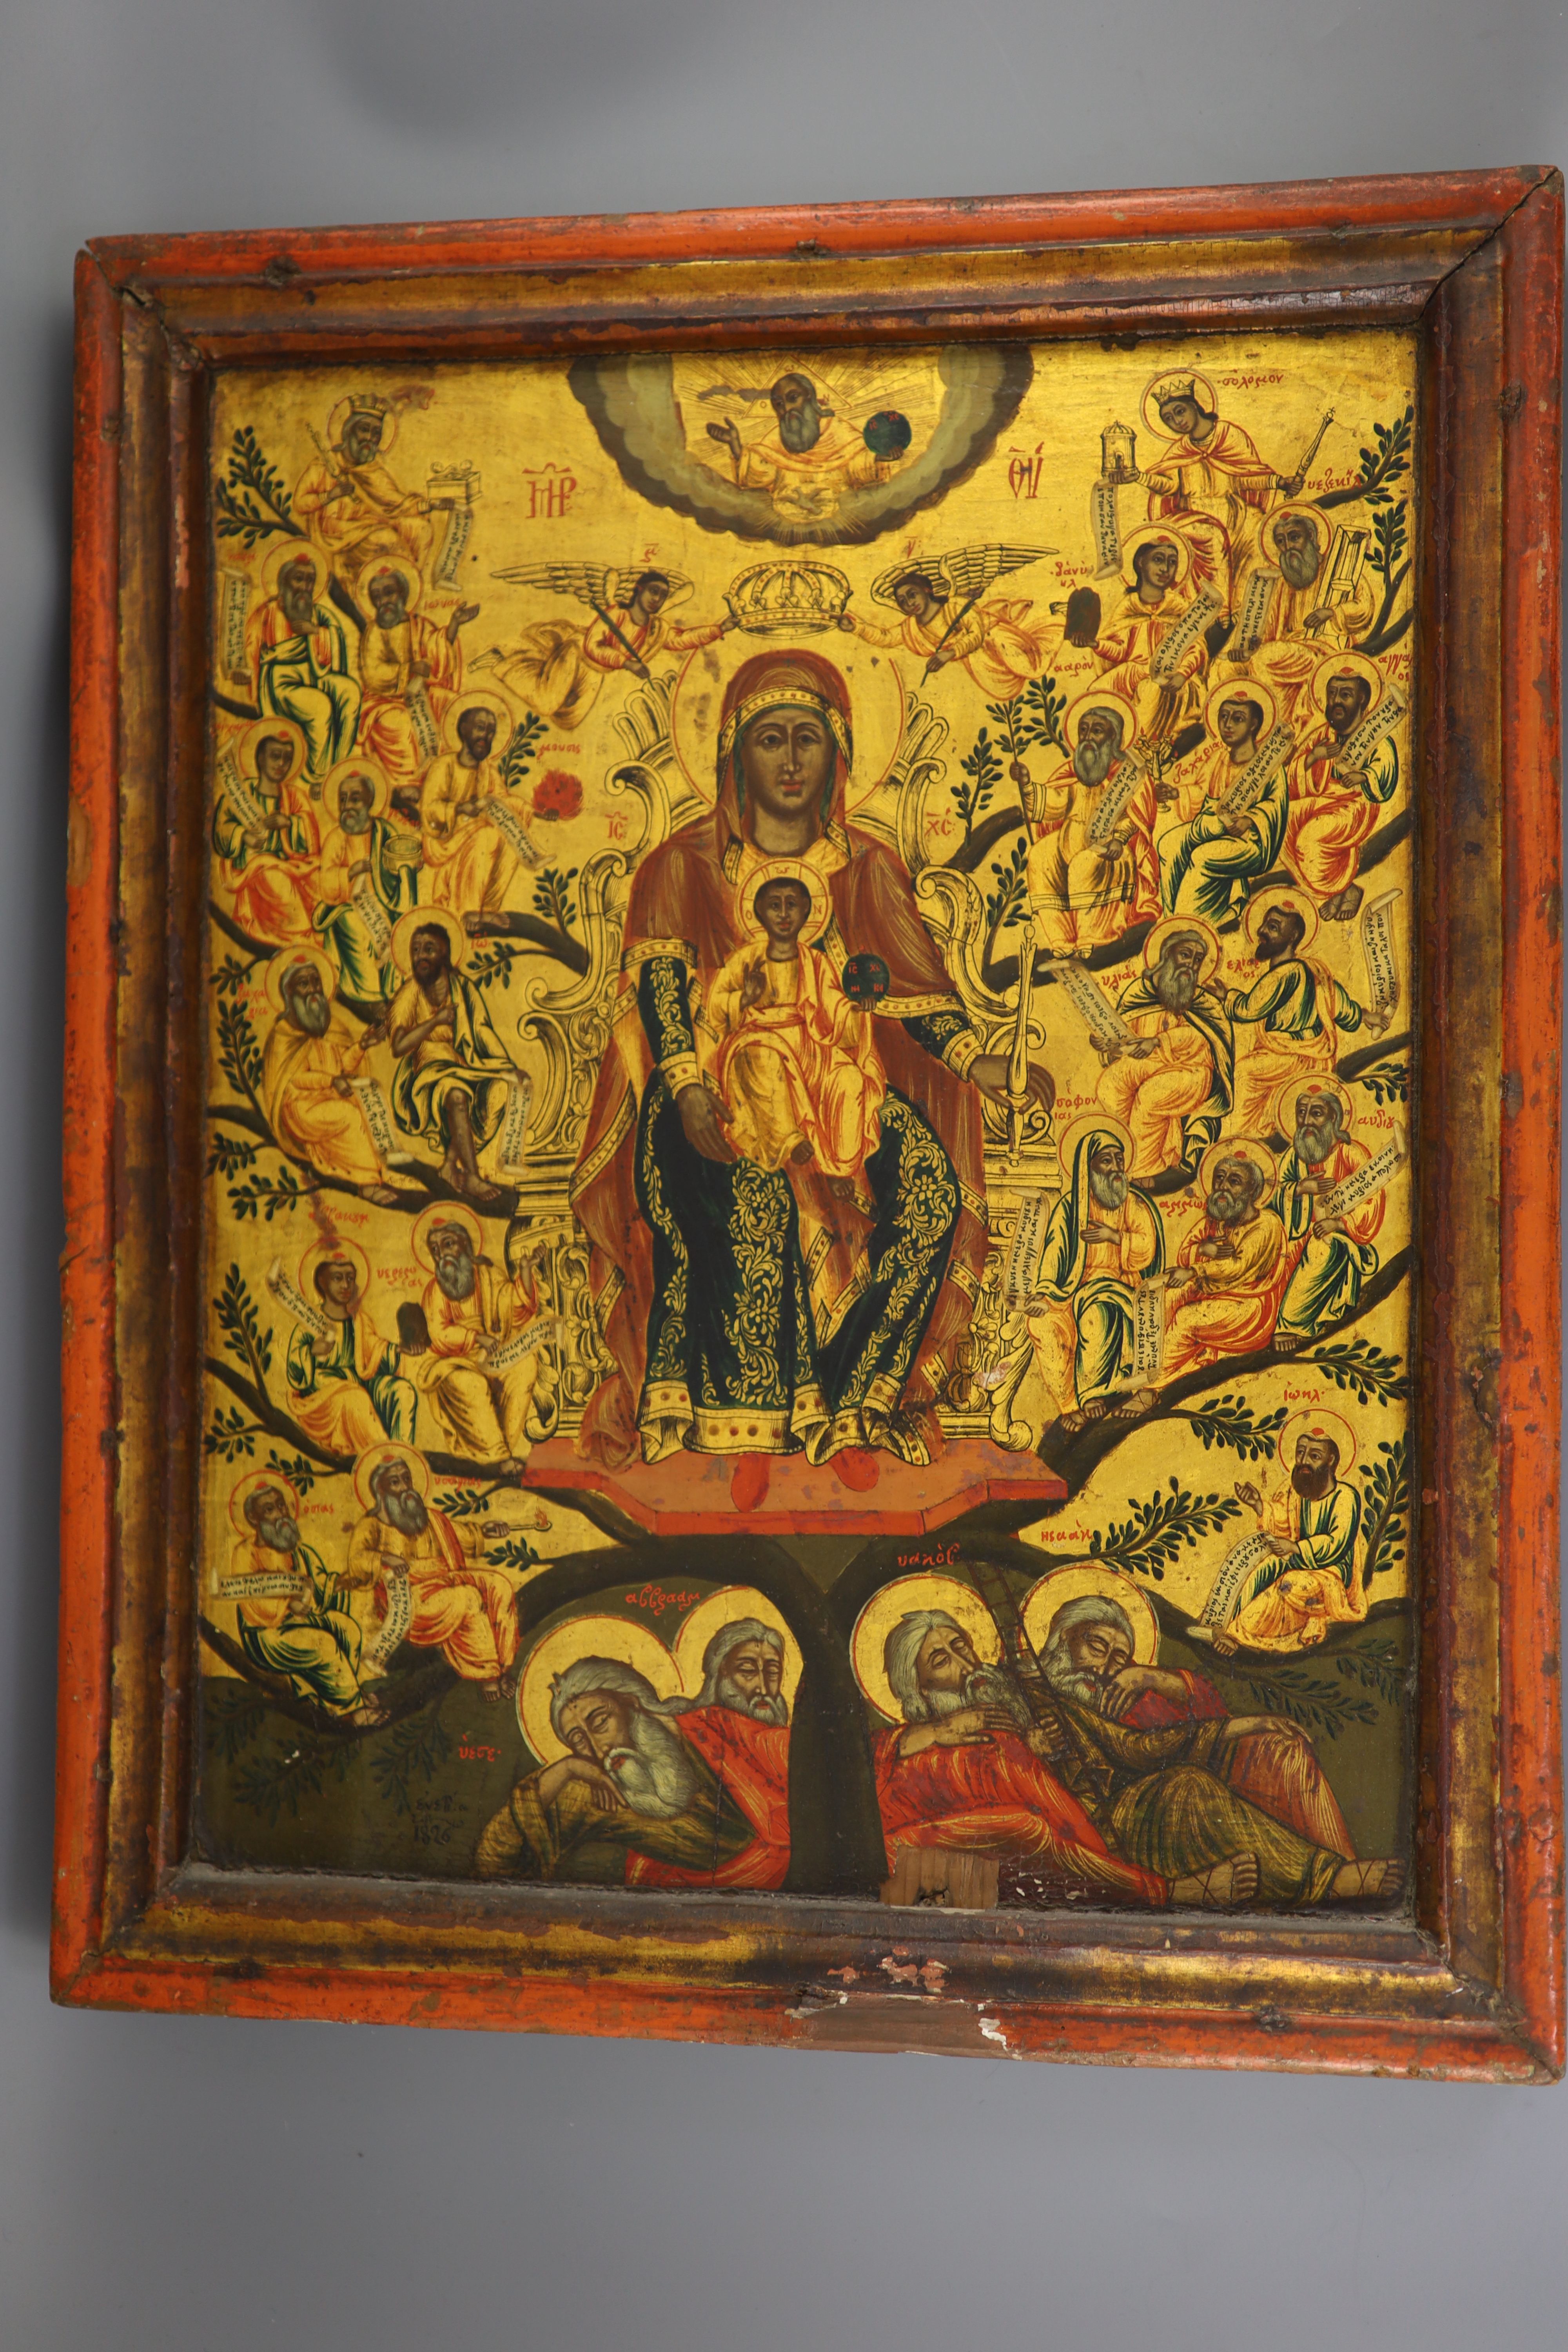 An early 19th century tempera on wooden panel icon, 22 x 18.5in.